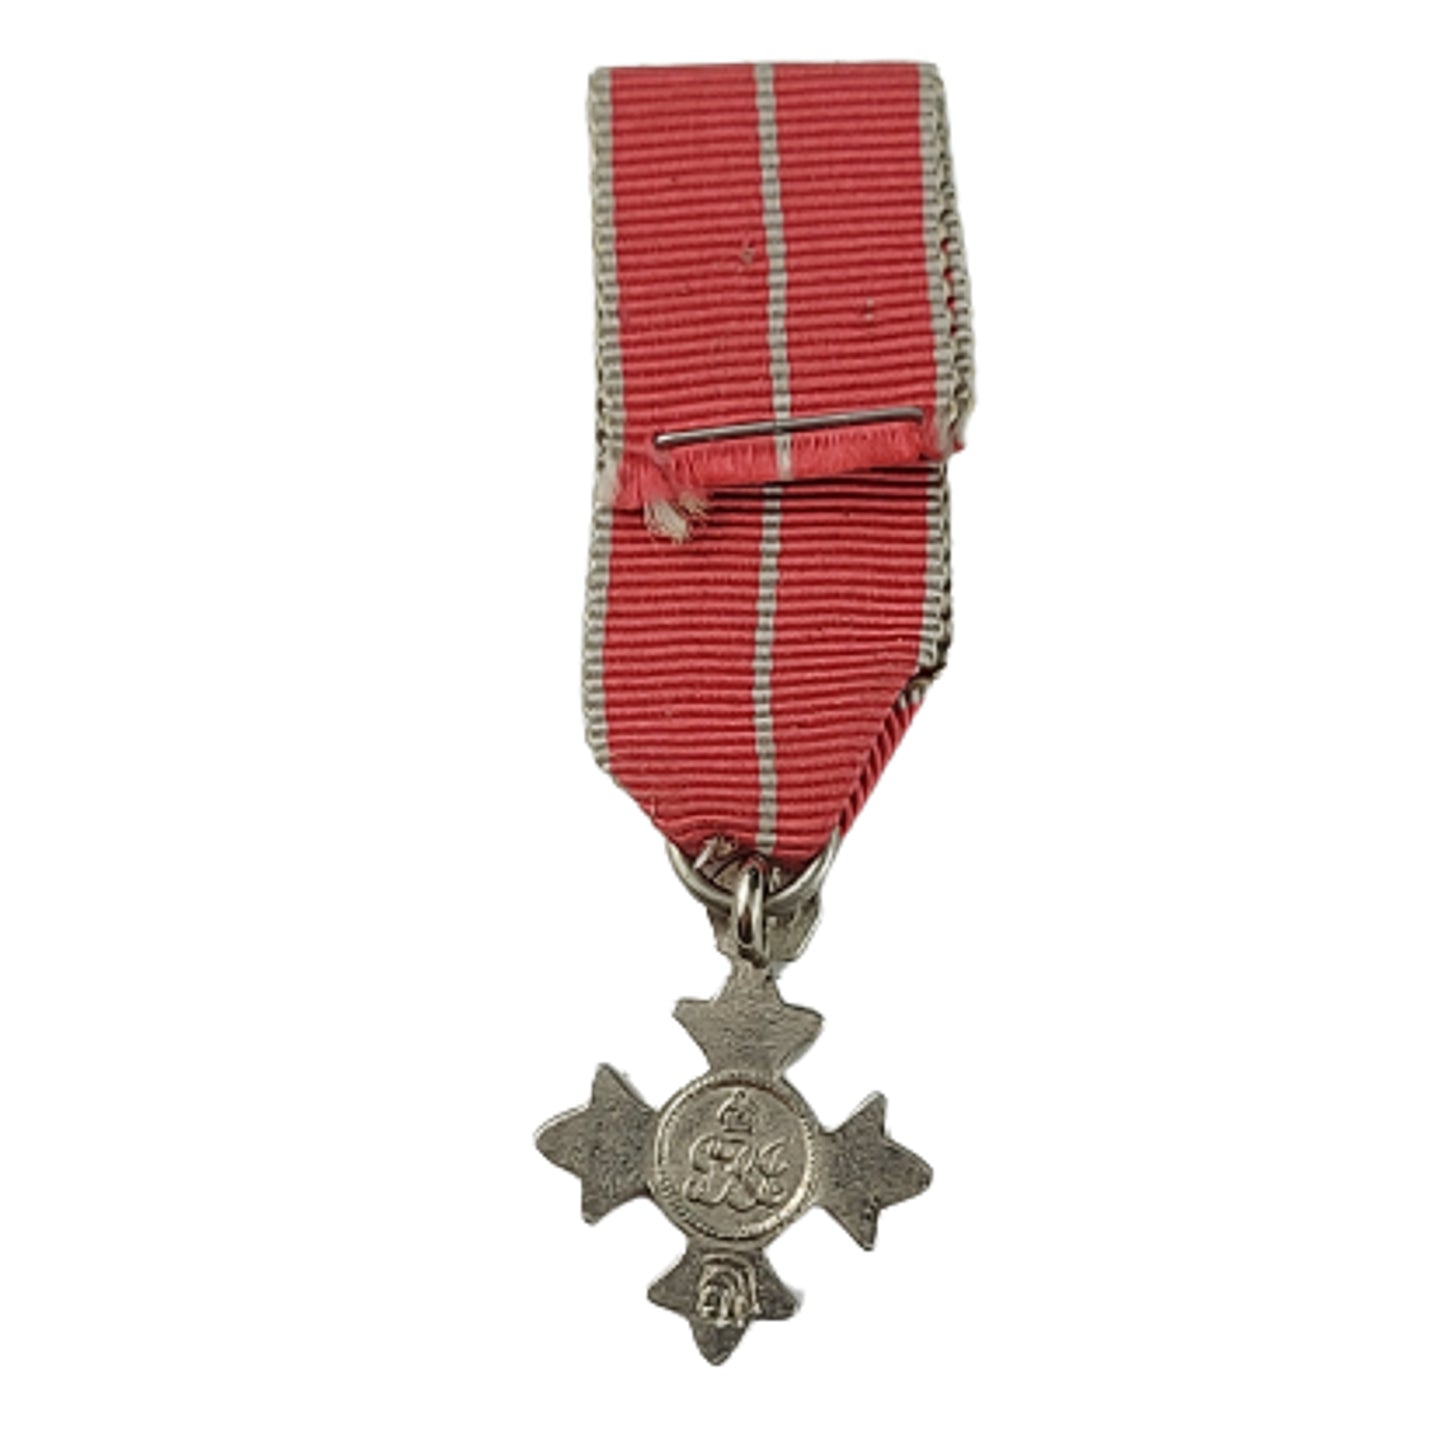 Miniature Order Of The British Empire Medal